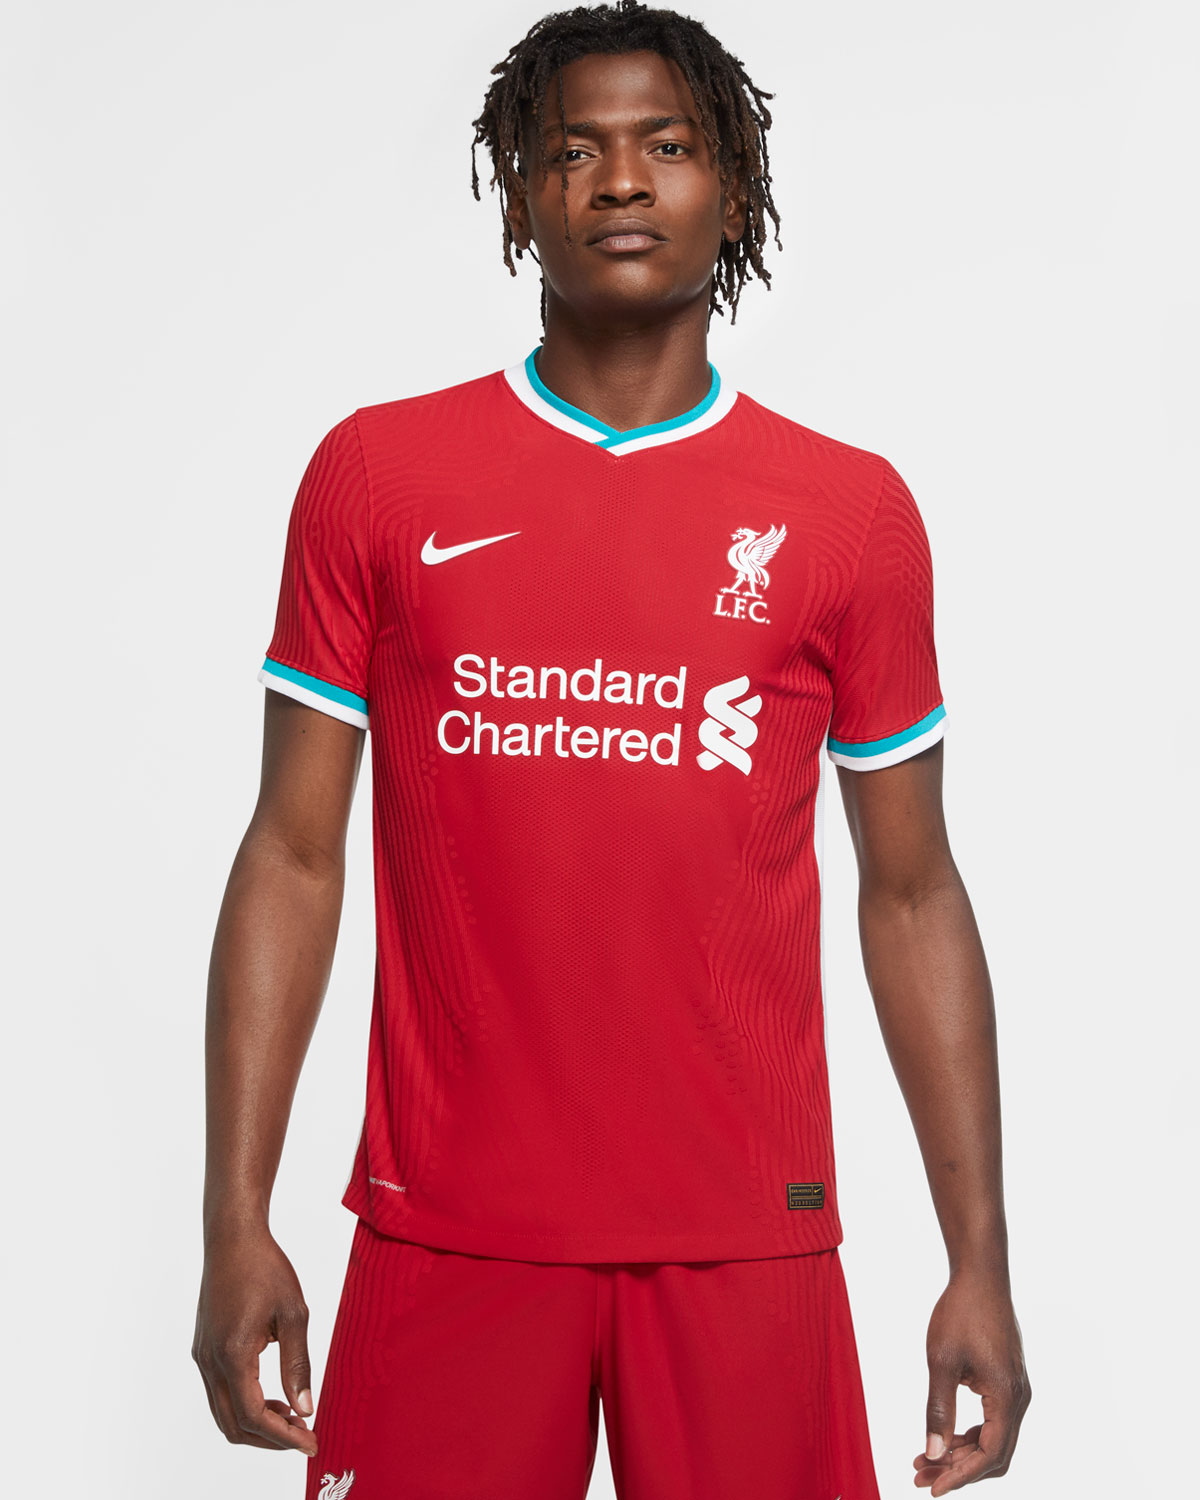 You won't Believe This.. 44+ Hidden Facts of Liverpool Jersey 2021